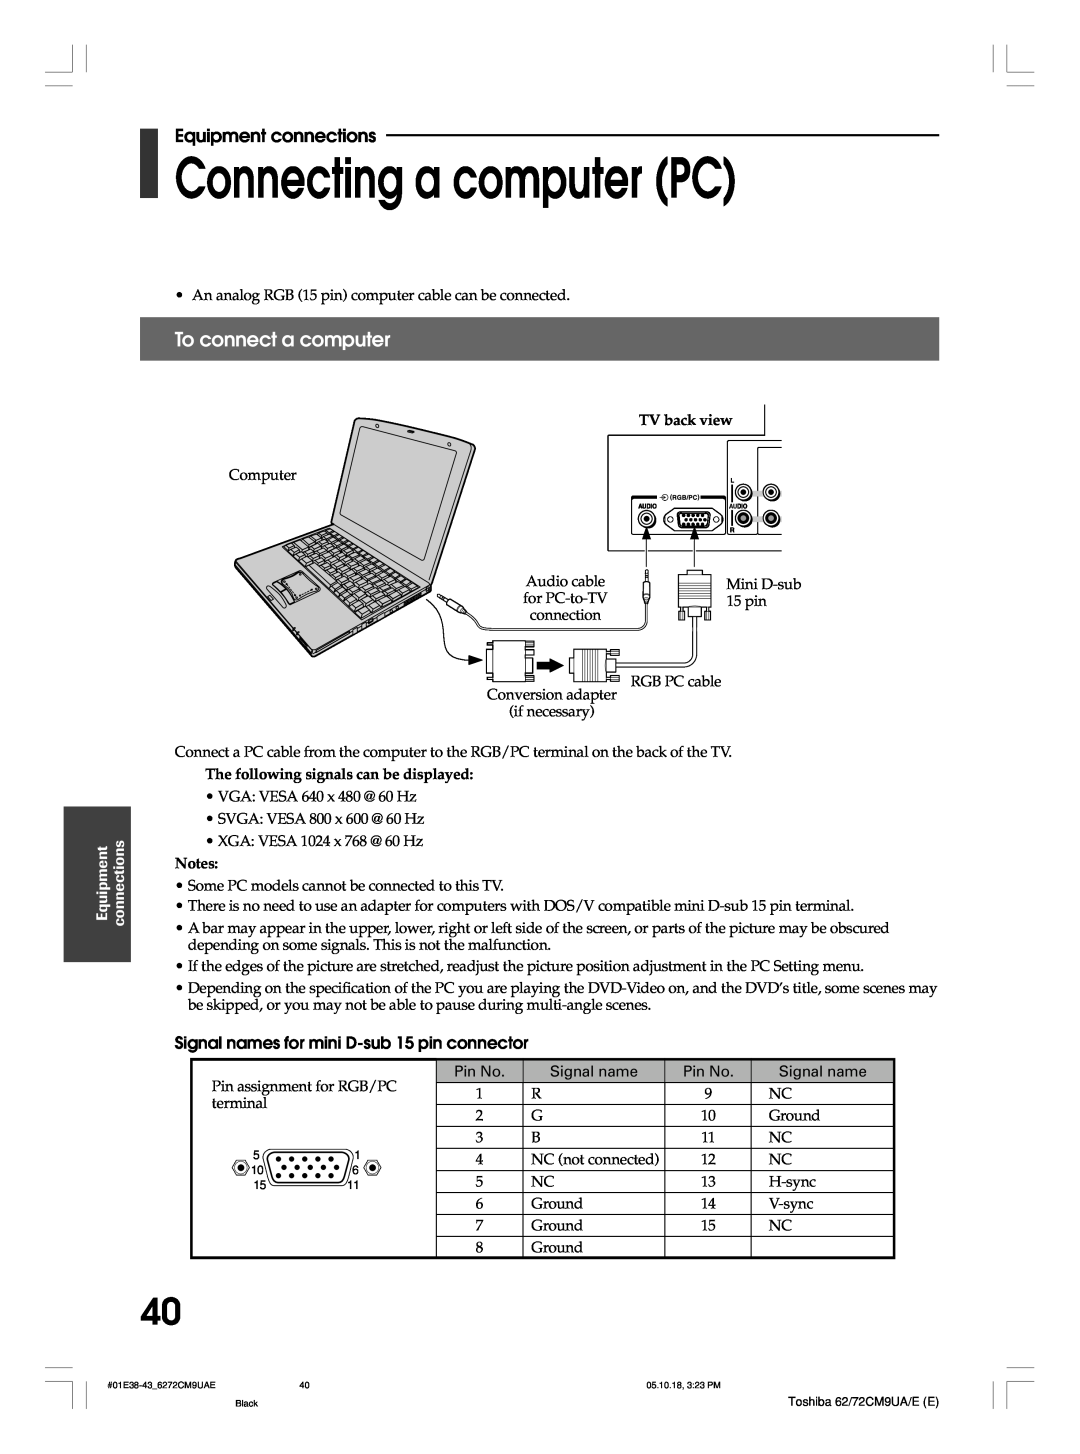 Toshiba 62CM9UA Connecting a computer PC, To connect a computer, Signal names for mini D-sub 15 pin connector, Equipment 